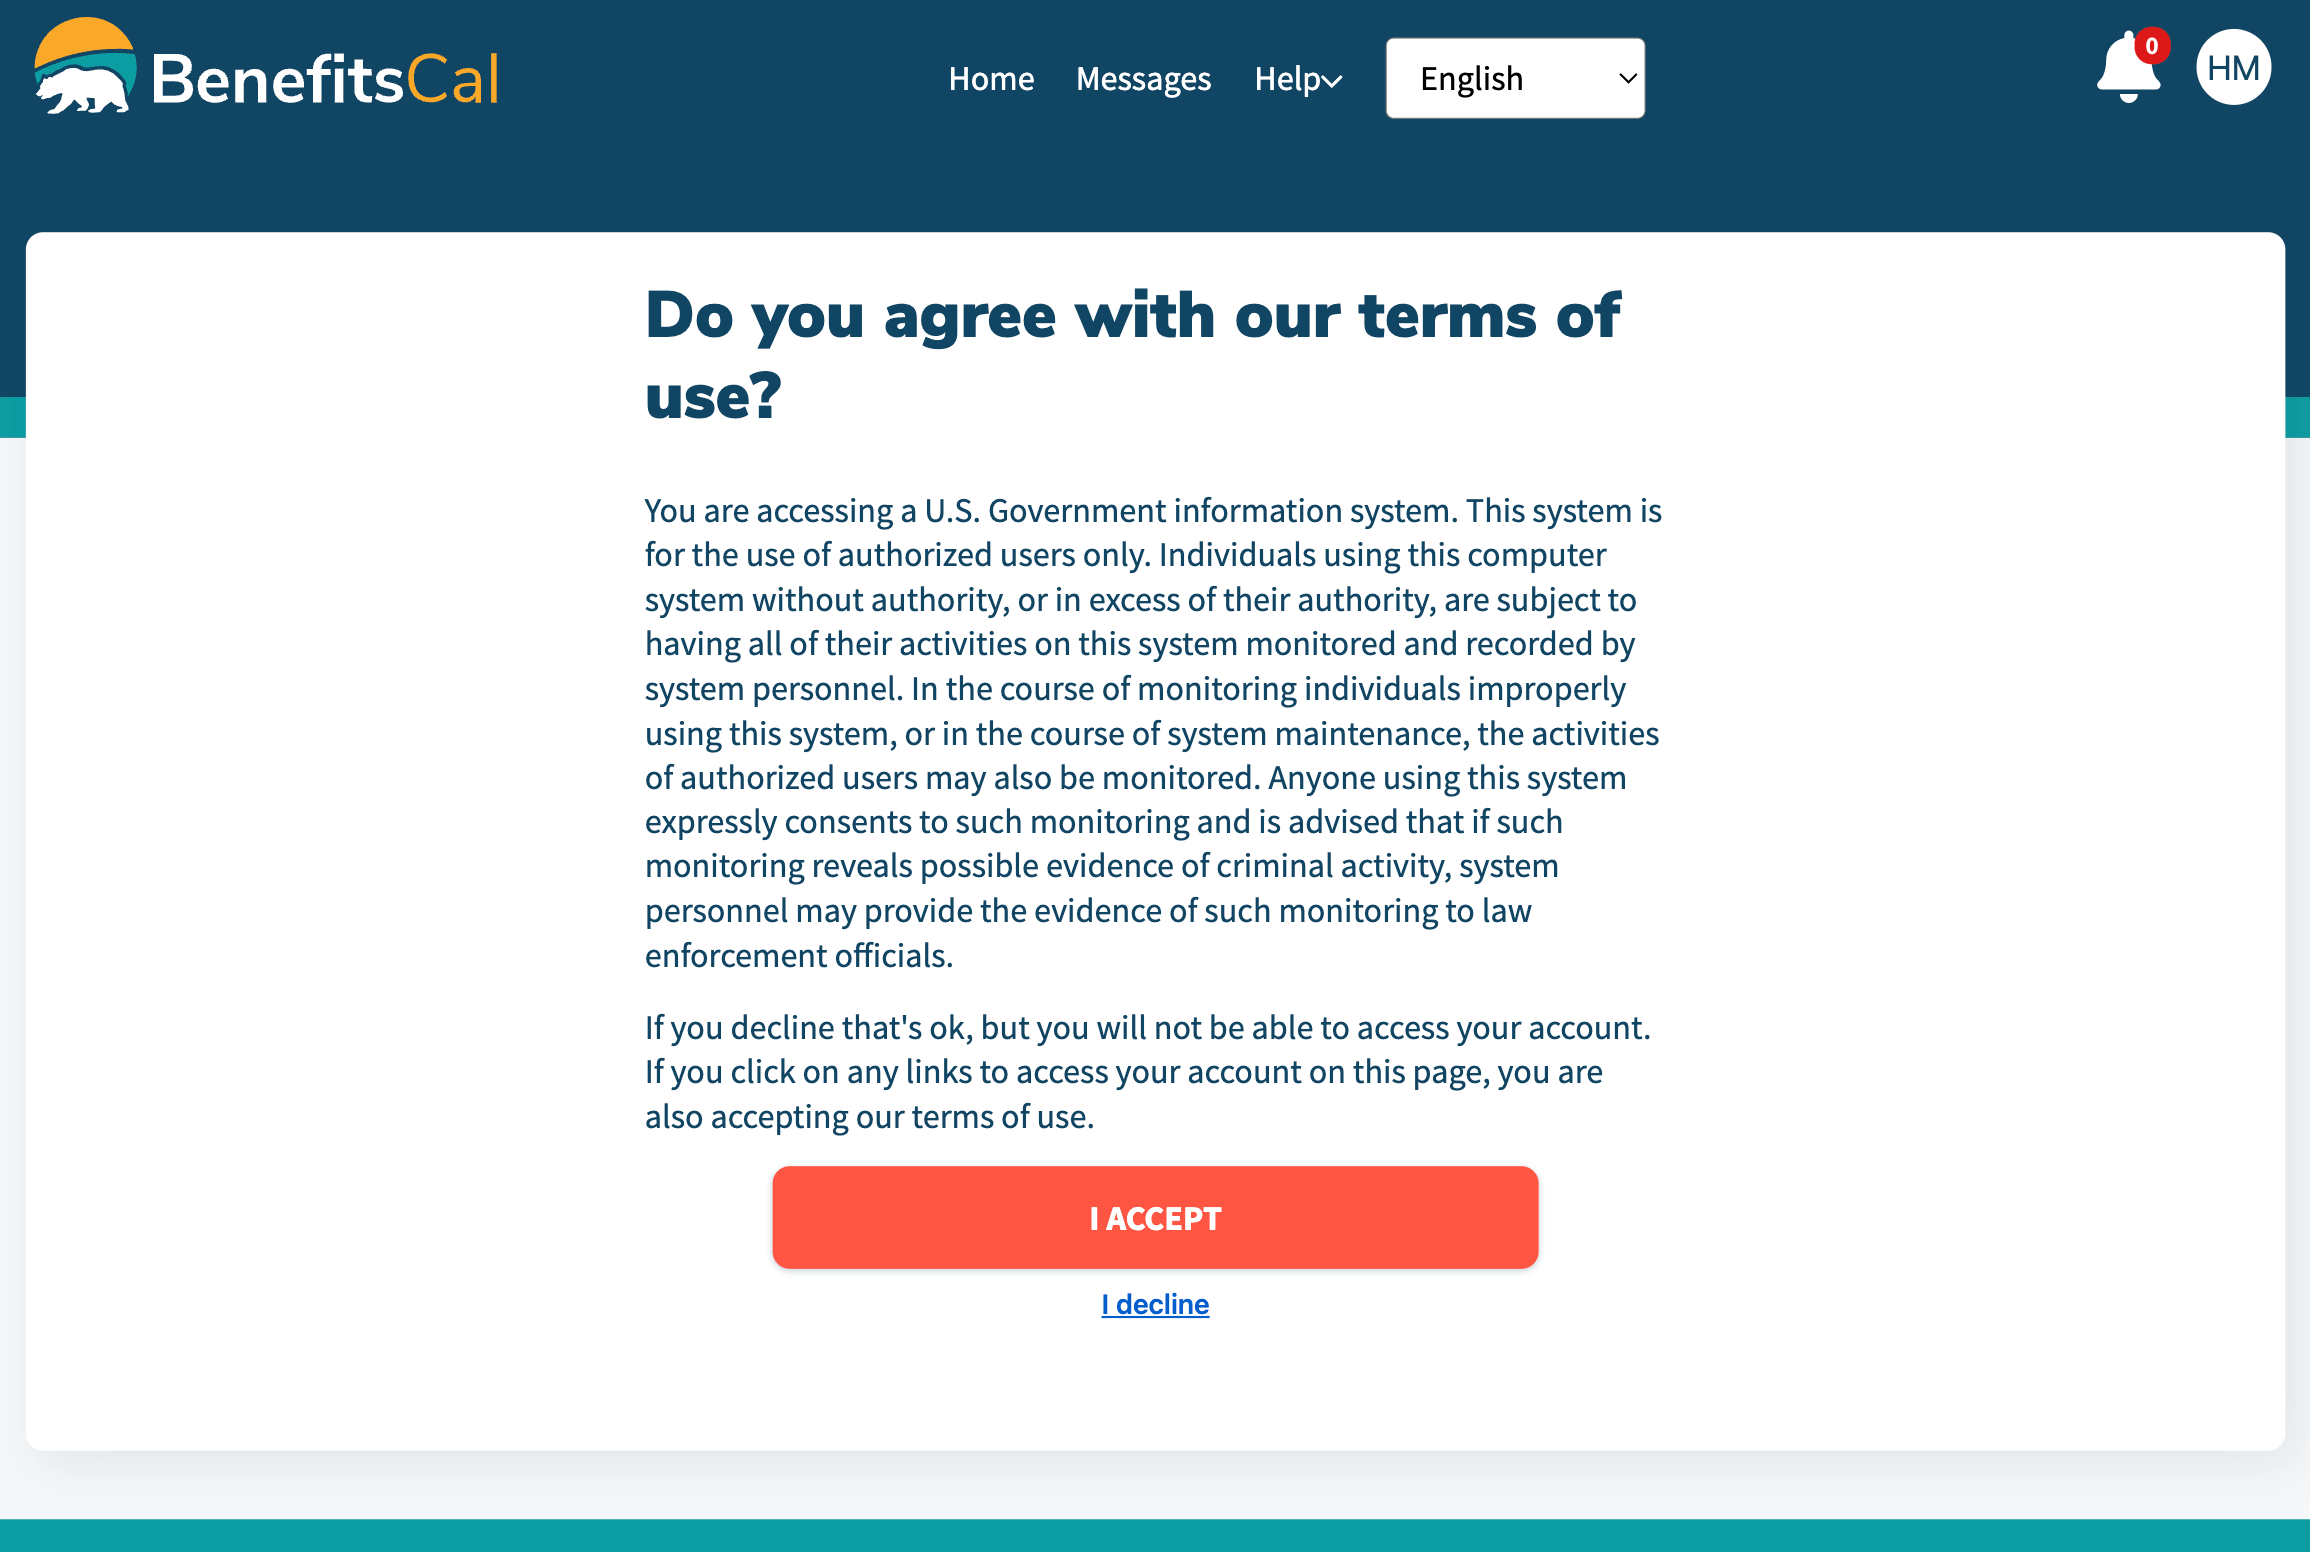 CalFresh Login Step 2: Accept BenefitsCal's Terms and Conditions to complete your C4Yourself Login